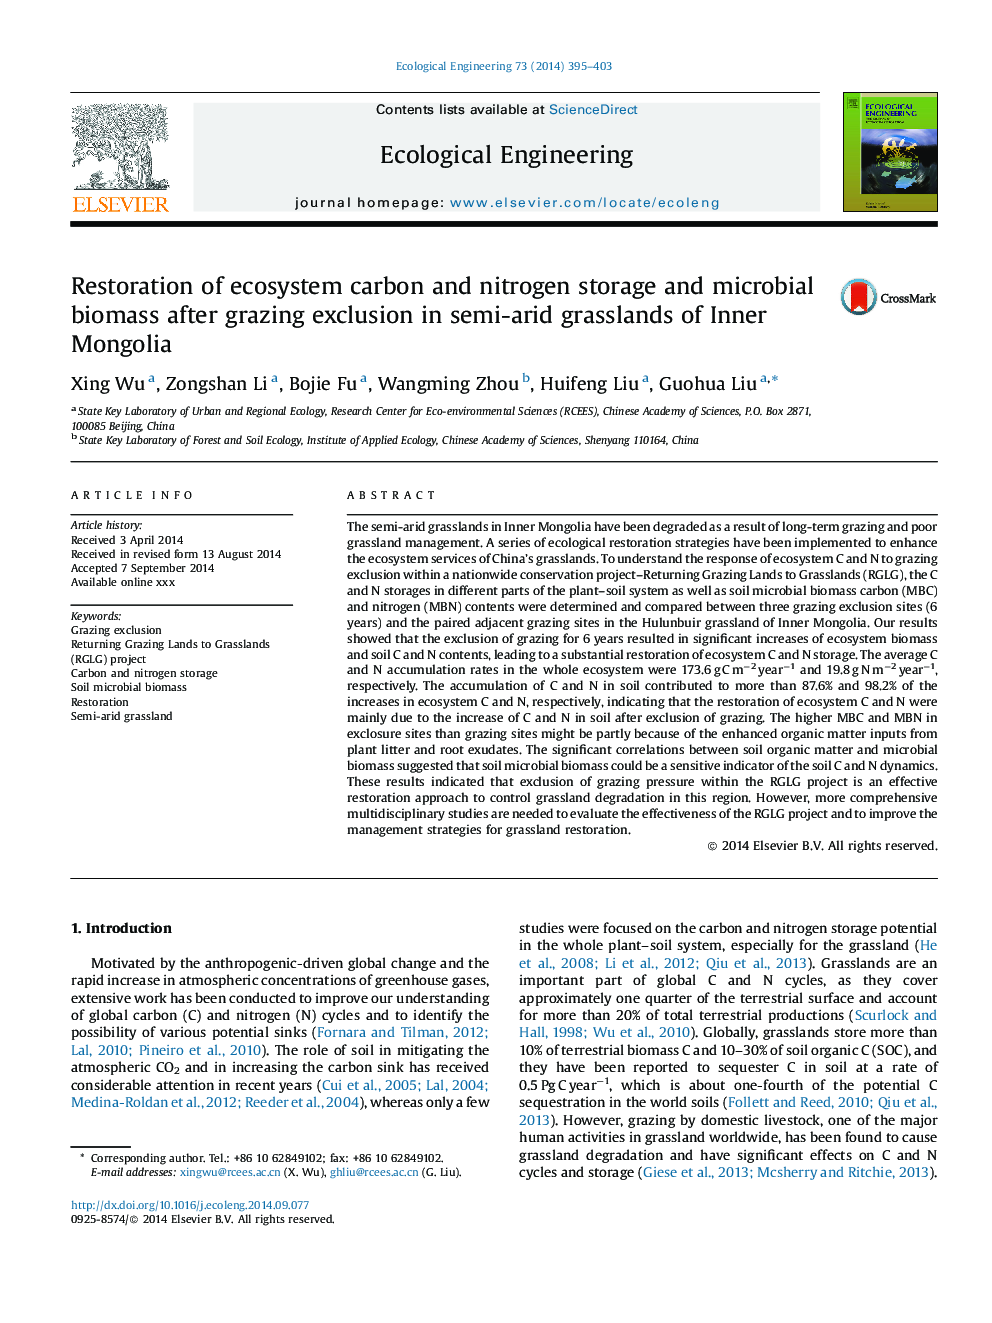 Restoration of ecosystem carbon and nitrogen storage and microbial biomass after grazing exclusion in semi-arid grasslands of Inner Mongolia